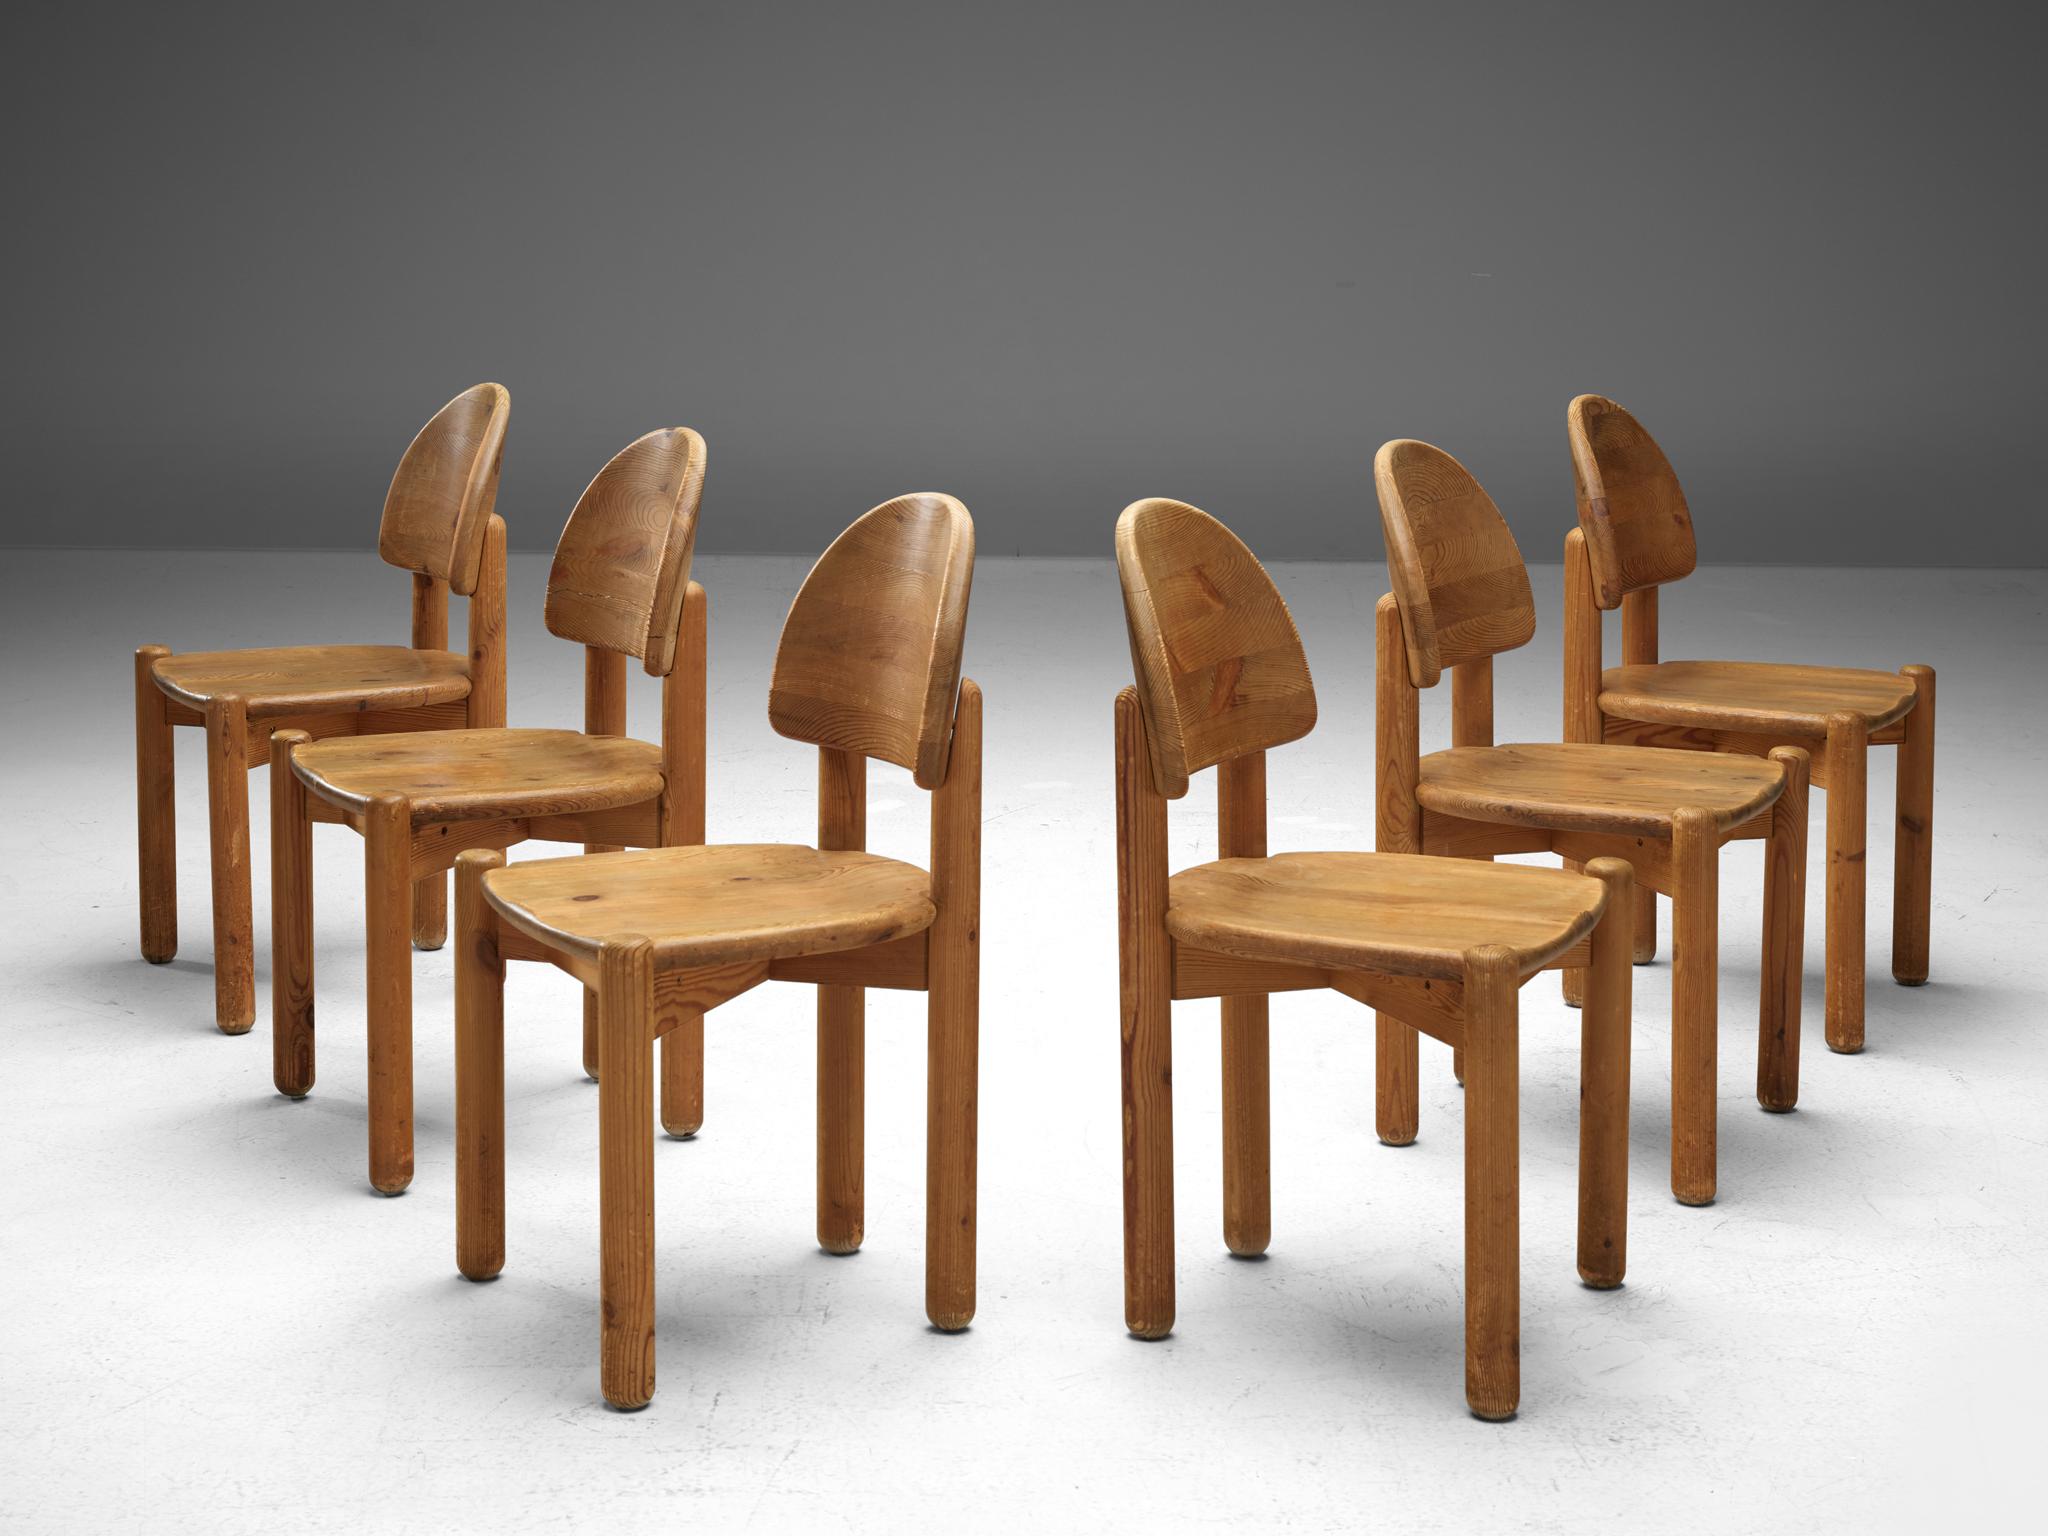 Rainer Daumiller for Hirtshals Savvaerk, set of six dining chairs, pine, Denmark, 1970s. 

Beautiful, organic and natural dining chairs in solid pine. A simplistic design with a round seating and attention for the natural expression and grain of the